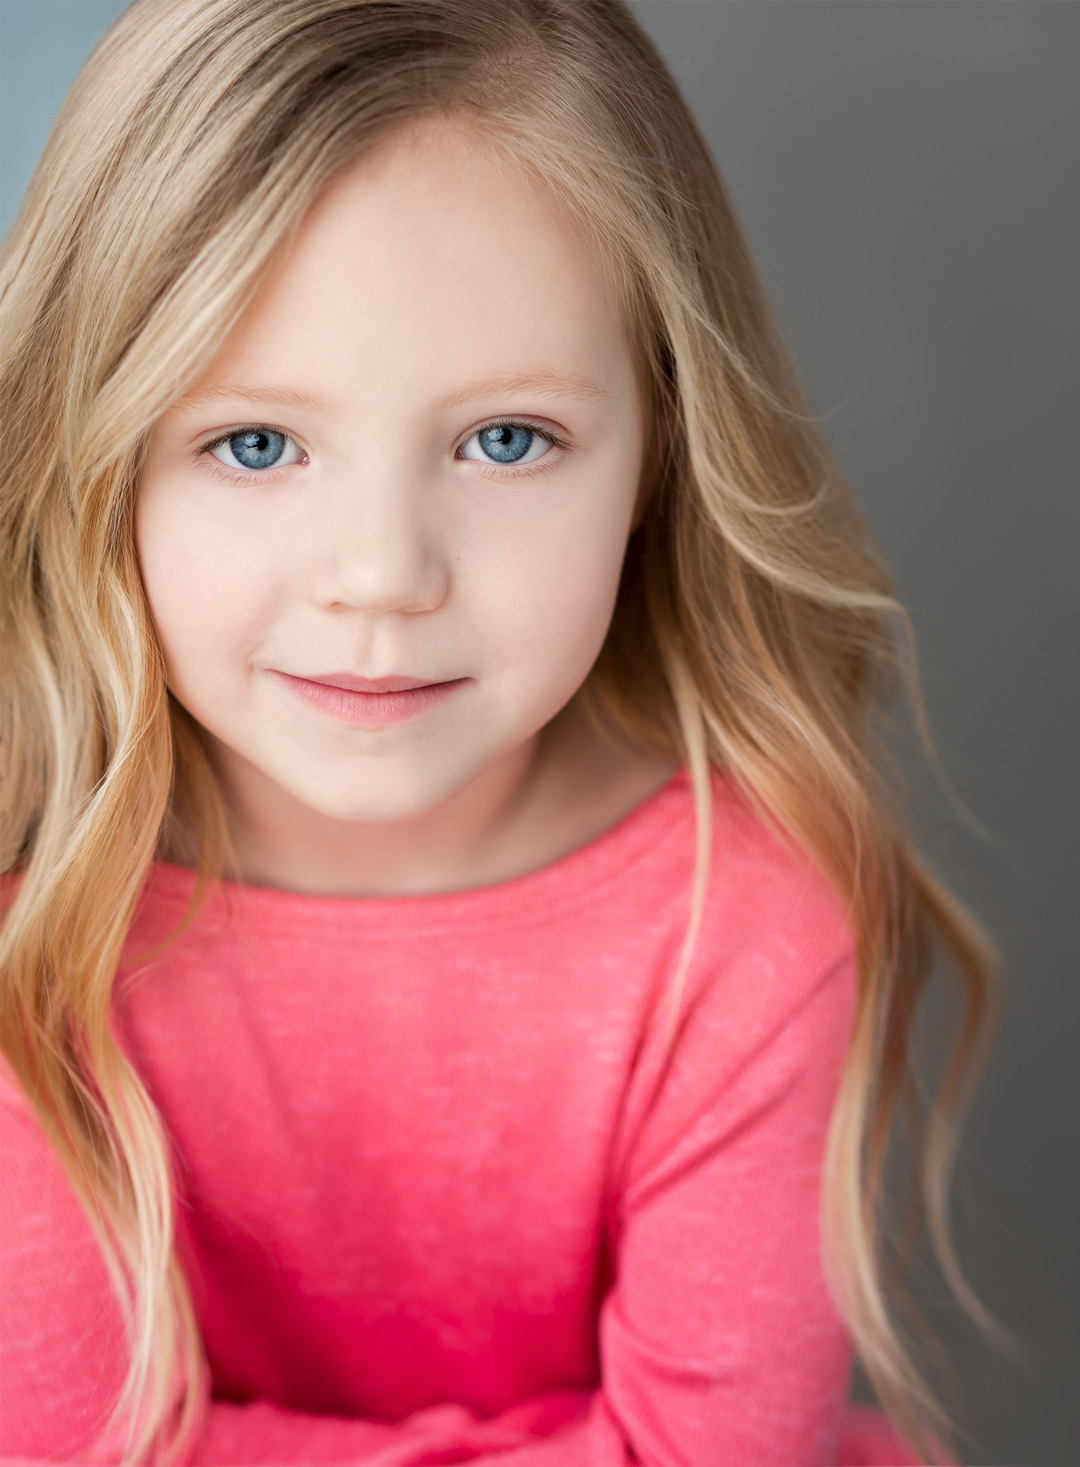 4 year old blonde child actor from LeBlanc school of acting